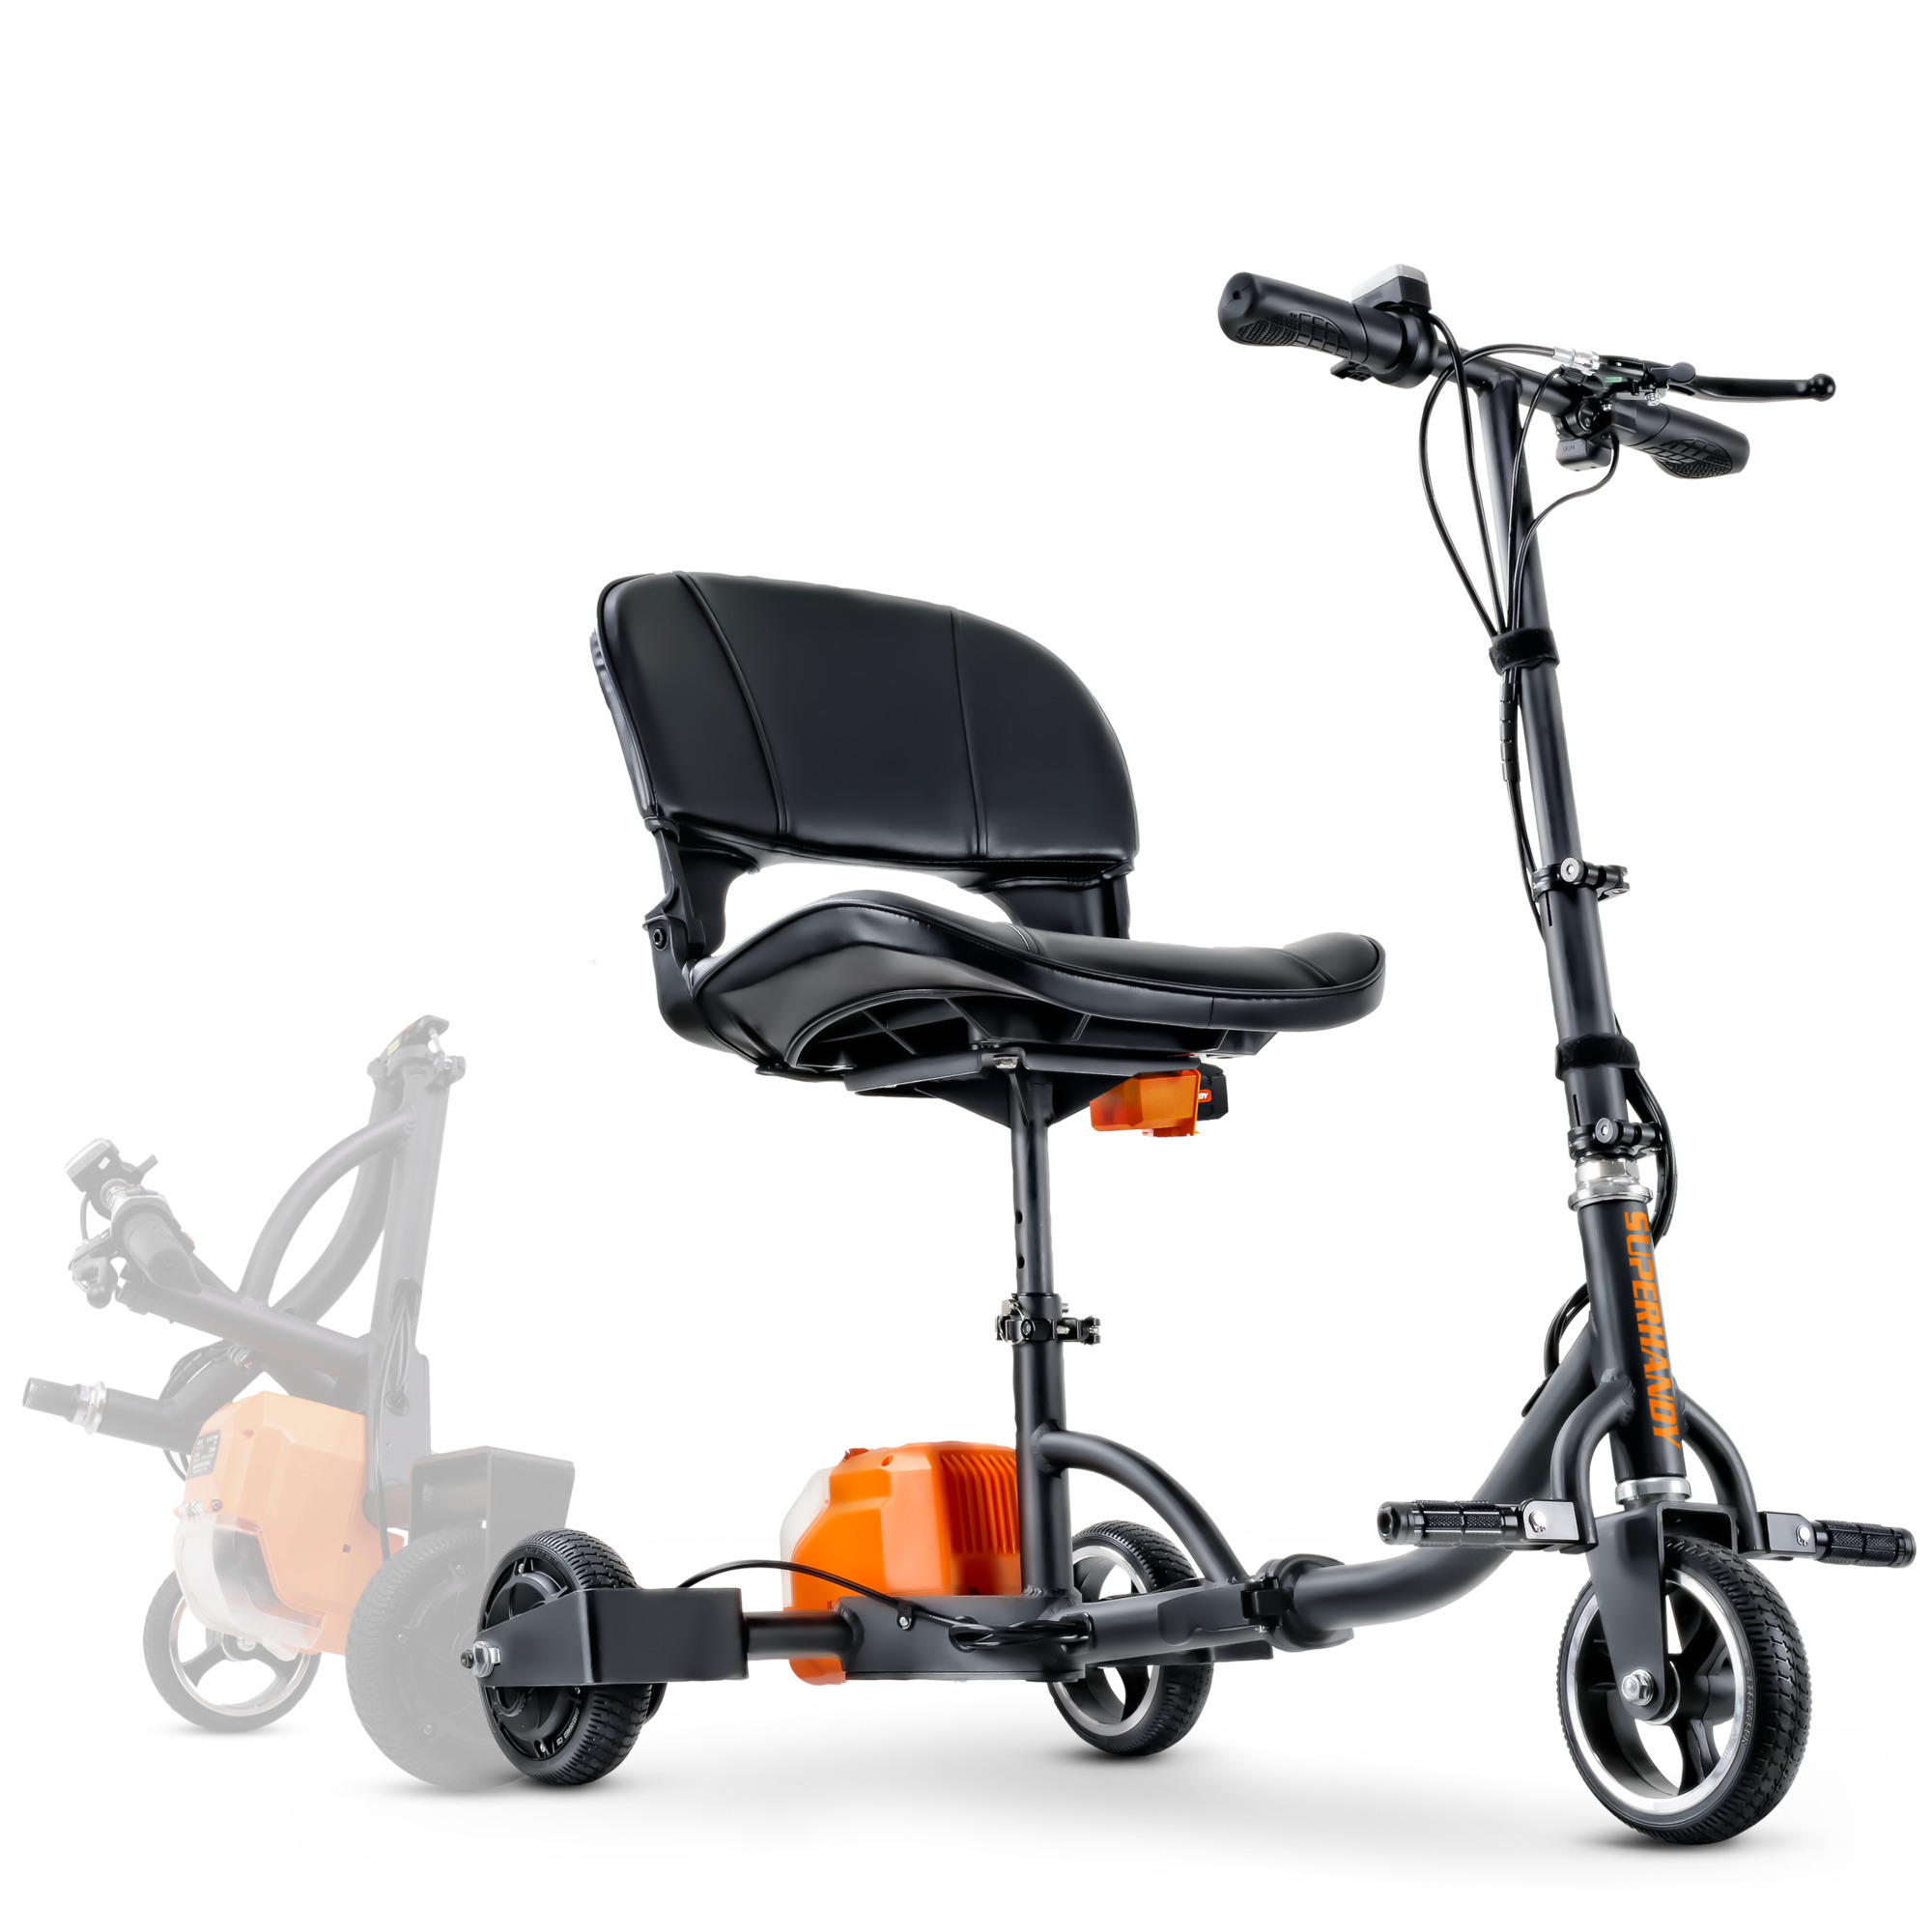 SuperHandy, 3 Wheel Power Mobility Scooter, Max. Speed 3 MPH, Weight Capacity 275 lb, Model TRI-GUT112